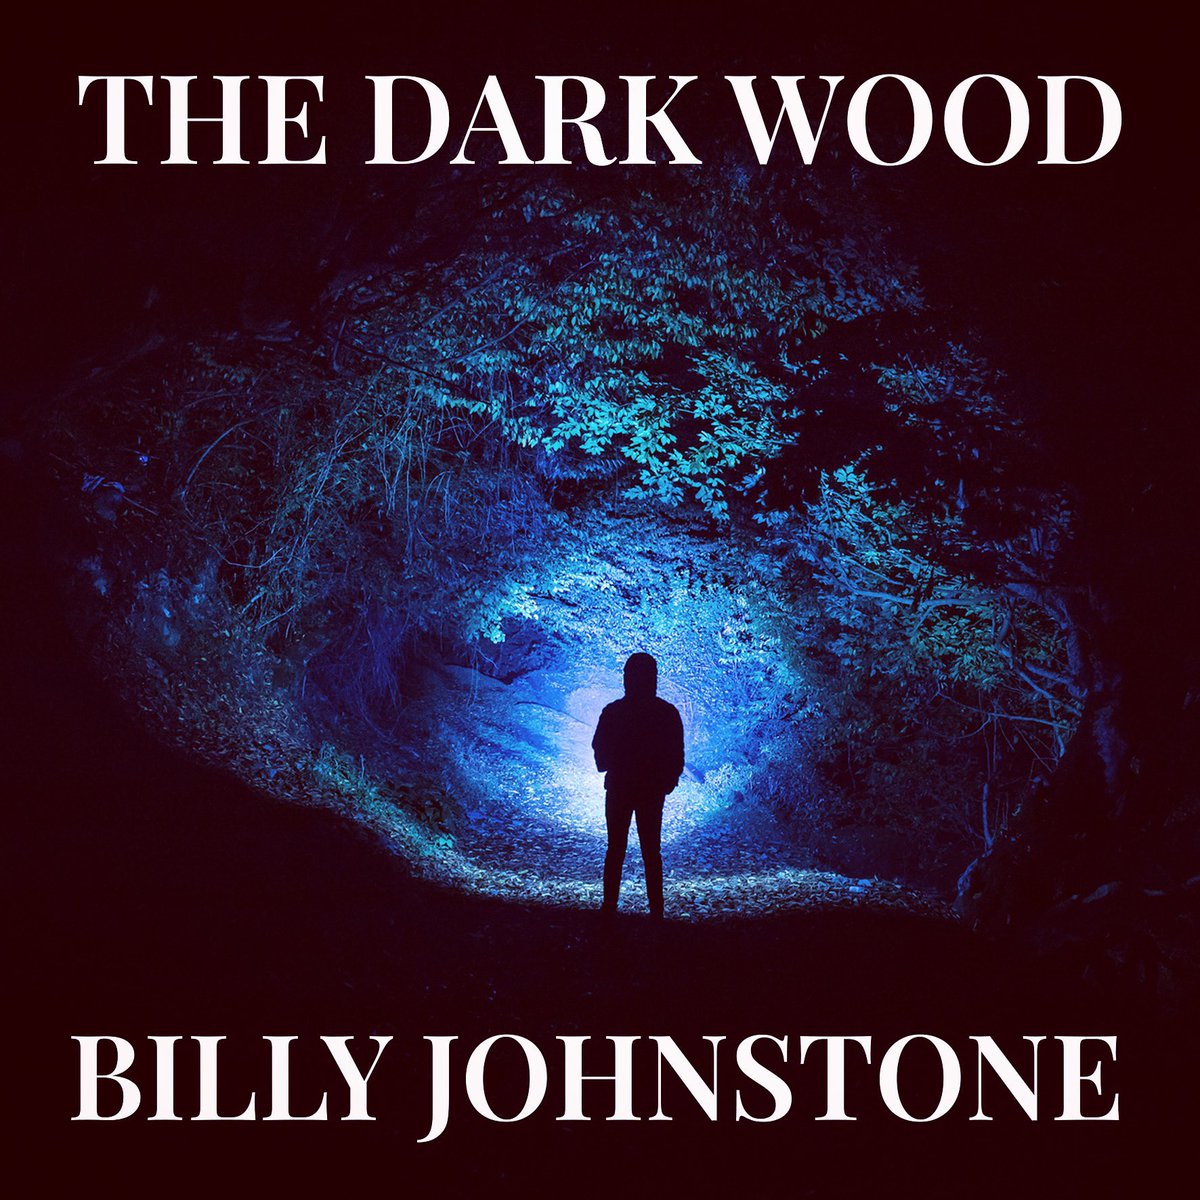 THE DARK WOOD, by me and Billy Johnstone, is now on #Spotify & other places. Please share. Cheers :) 
“Beware the spectre trees!” open.spotify.com/album/3szJkg8p…
… #indierock #folkrock #song #music #SpotifySingles #independentmusician #rock #indie #indiemusic  #song